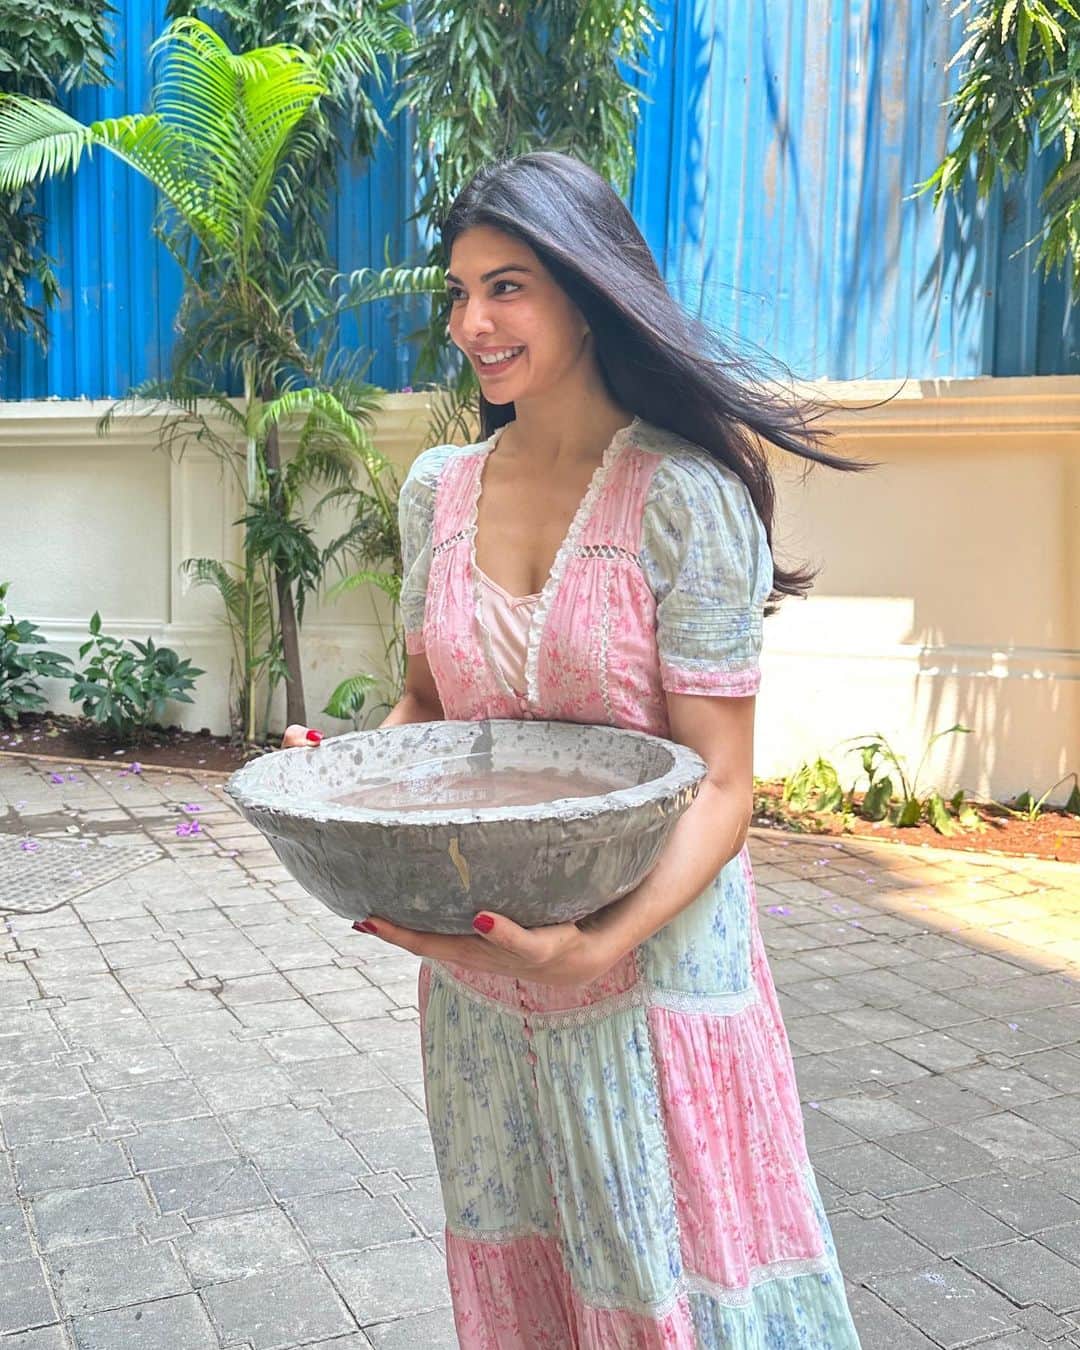 Jacqueline Fernandezのインスタグラム：「🌸🌸🌸 these water bowls will help stray animals during these difficult summer months to hydrate and stay cool!! I sincerely request all those who can to pls get these mitti bowls or even mitti bowls from your own local potters and place them outside your buildings! Pls tag @jf.yolofoundation @thefelinefoundation so we can repost your amazing work and spread the word!!! I got my mitti bowls from the @thefelinefoundation thank you so much for this amazing initiative 💜 also the water bowls need to be cleaned and refilled daily to avoid stagnant water and to keep it fresh and hygienic for the community!」